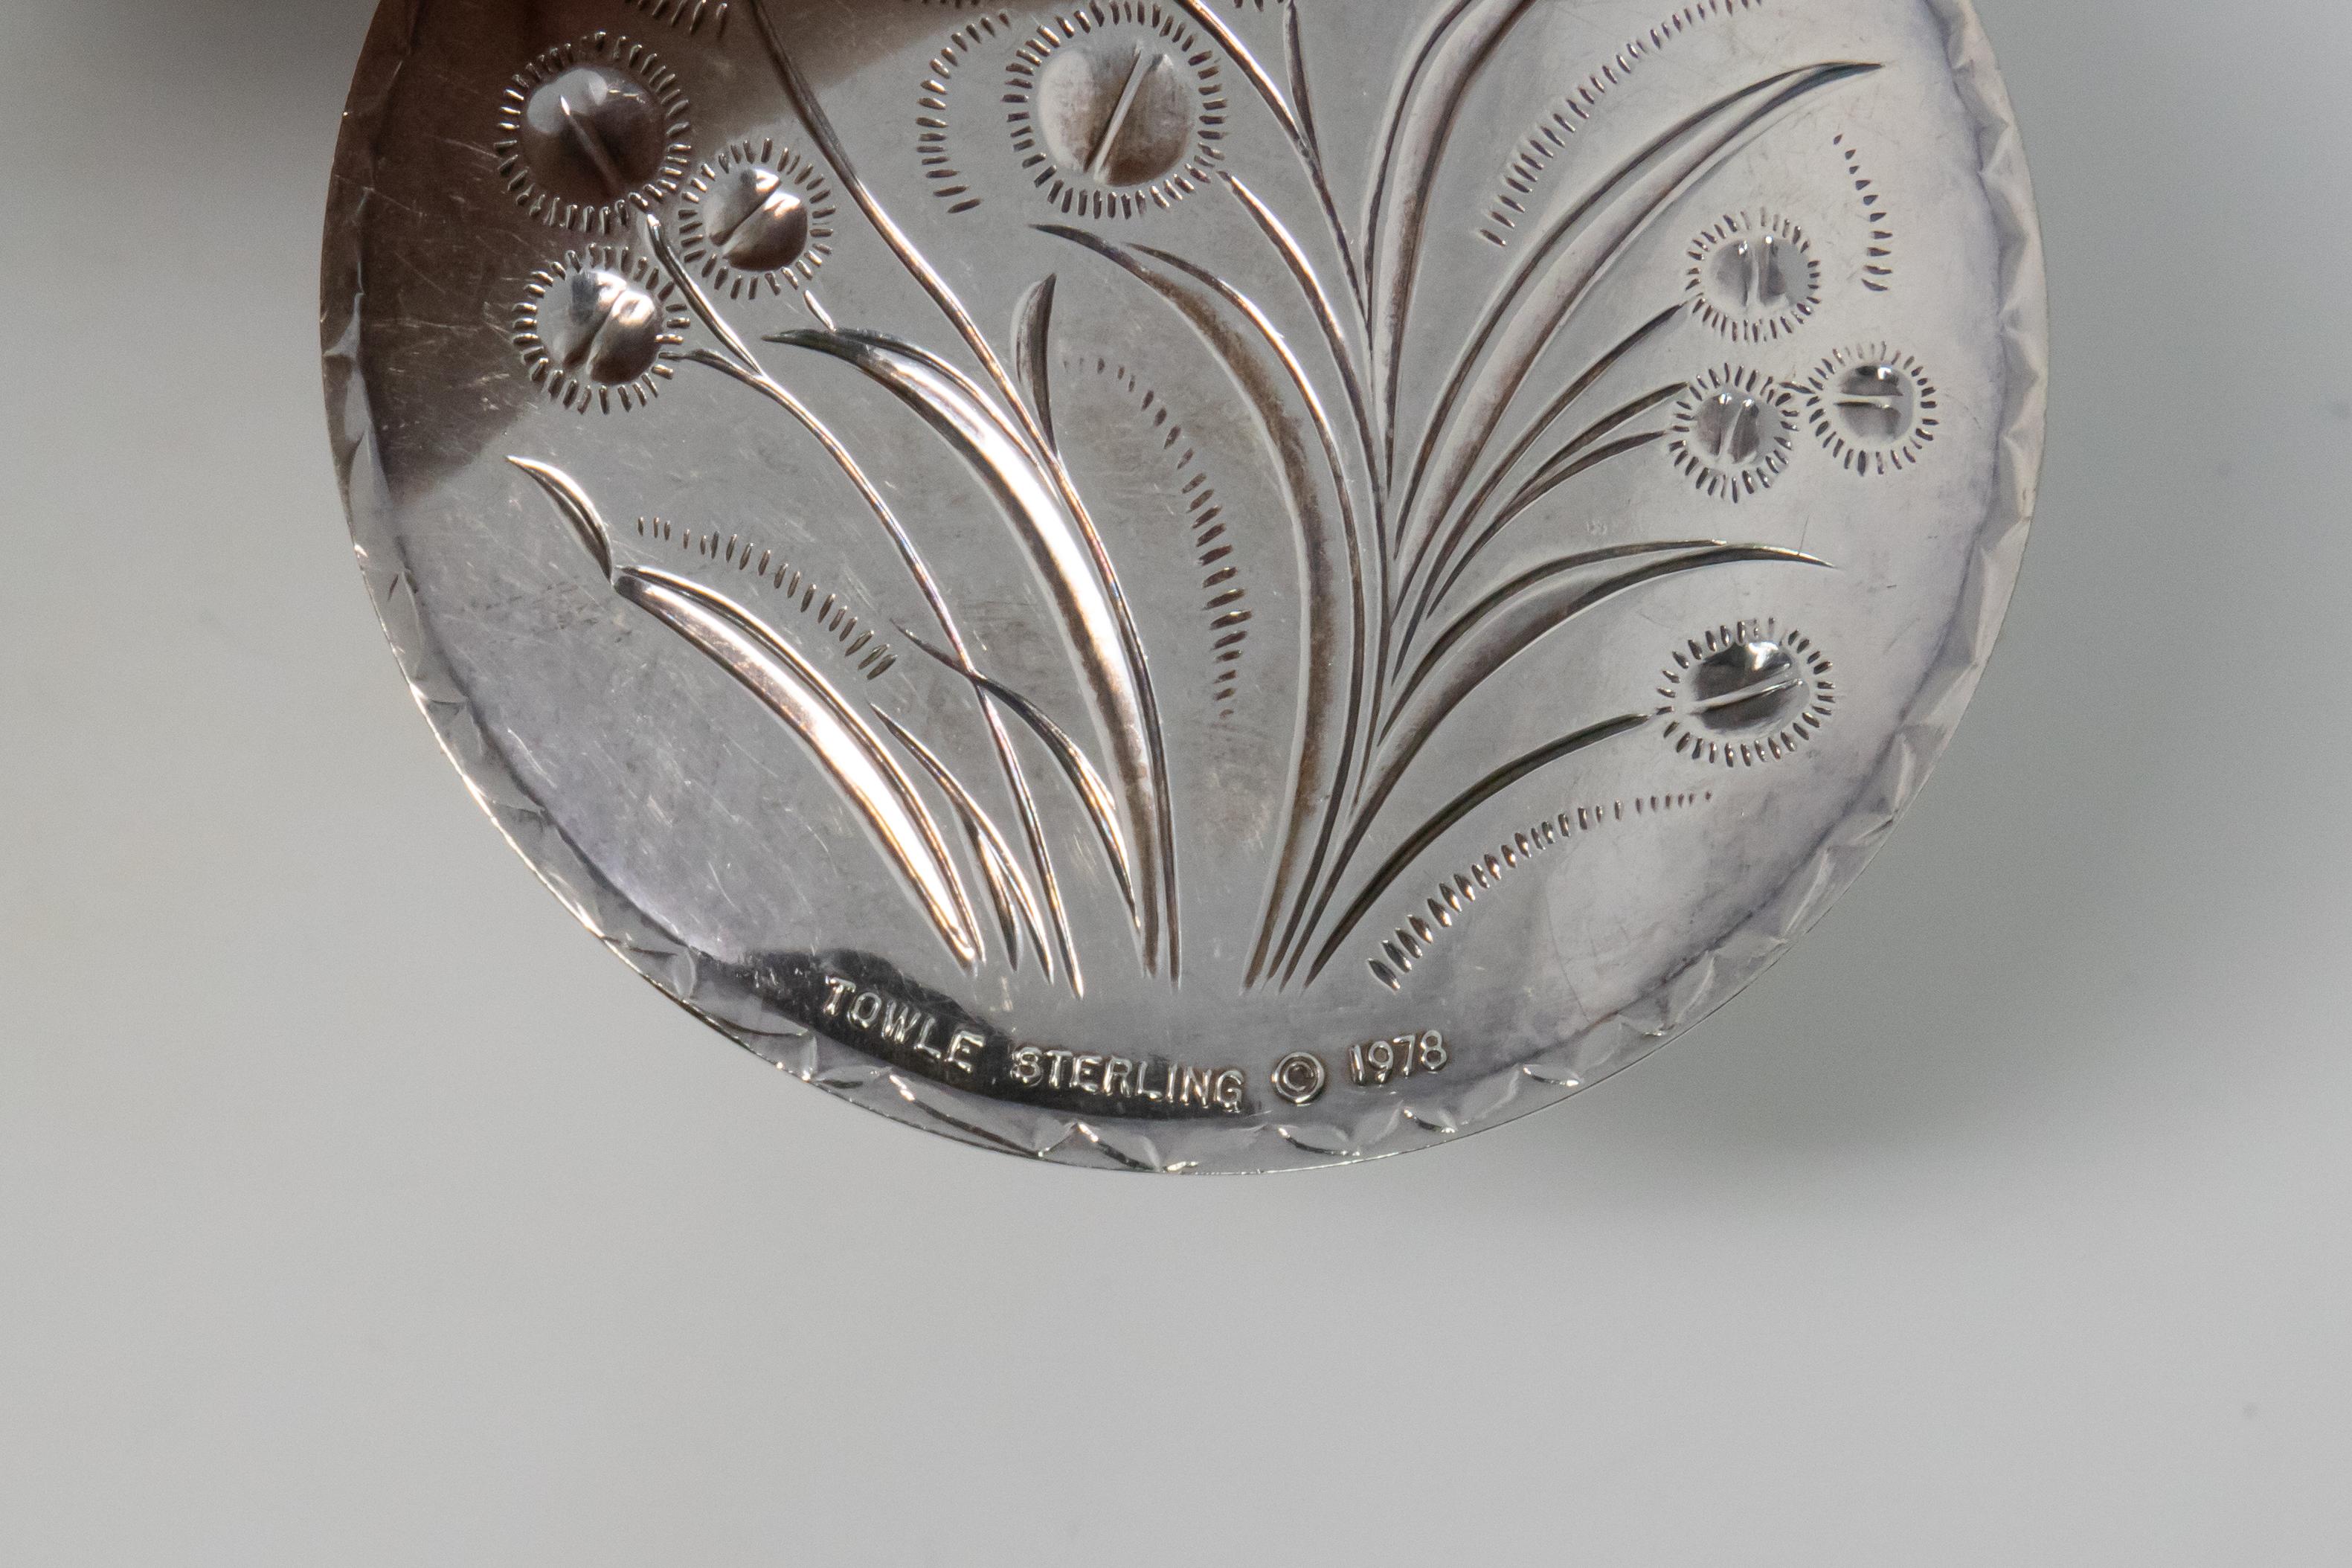 Offering a gorgeous Towle sterling eight maids a milking ornament. The front depicts the 8 maids holding buckets on their shoulders. They have a foliate circle around them and in the middle is a cows head.